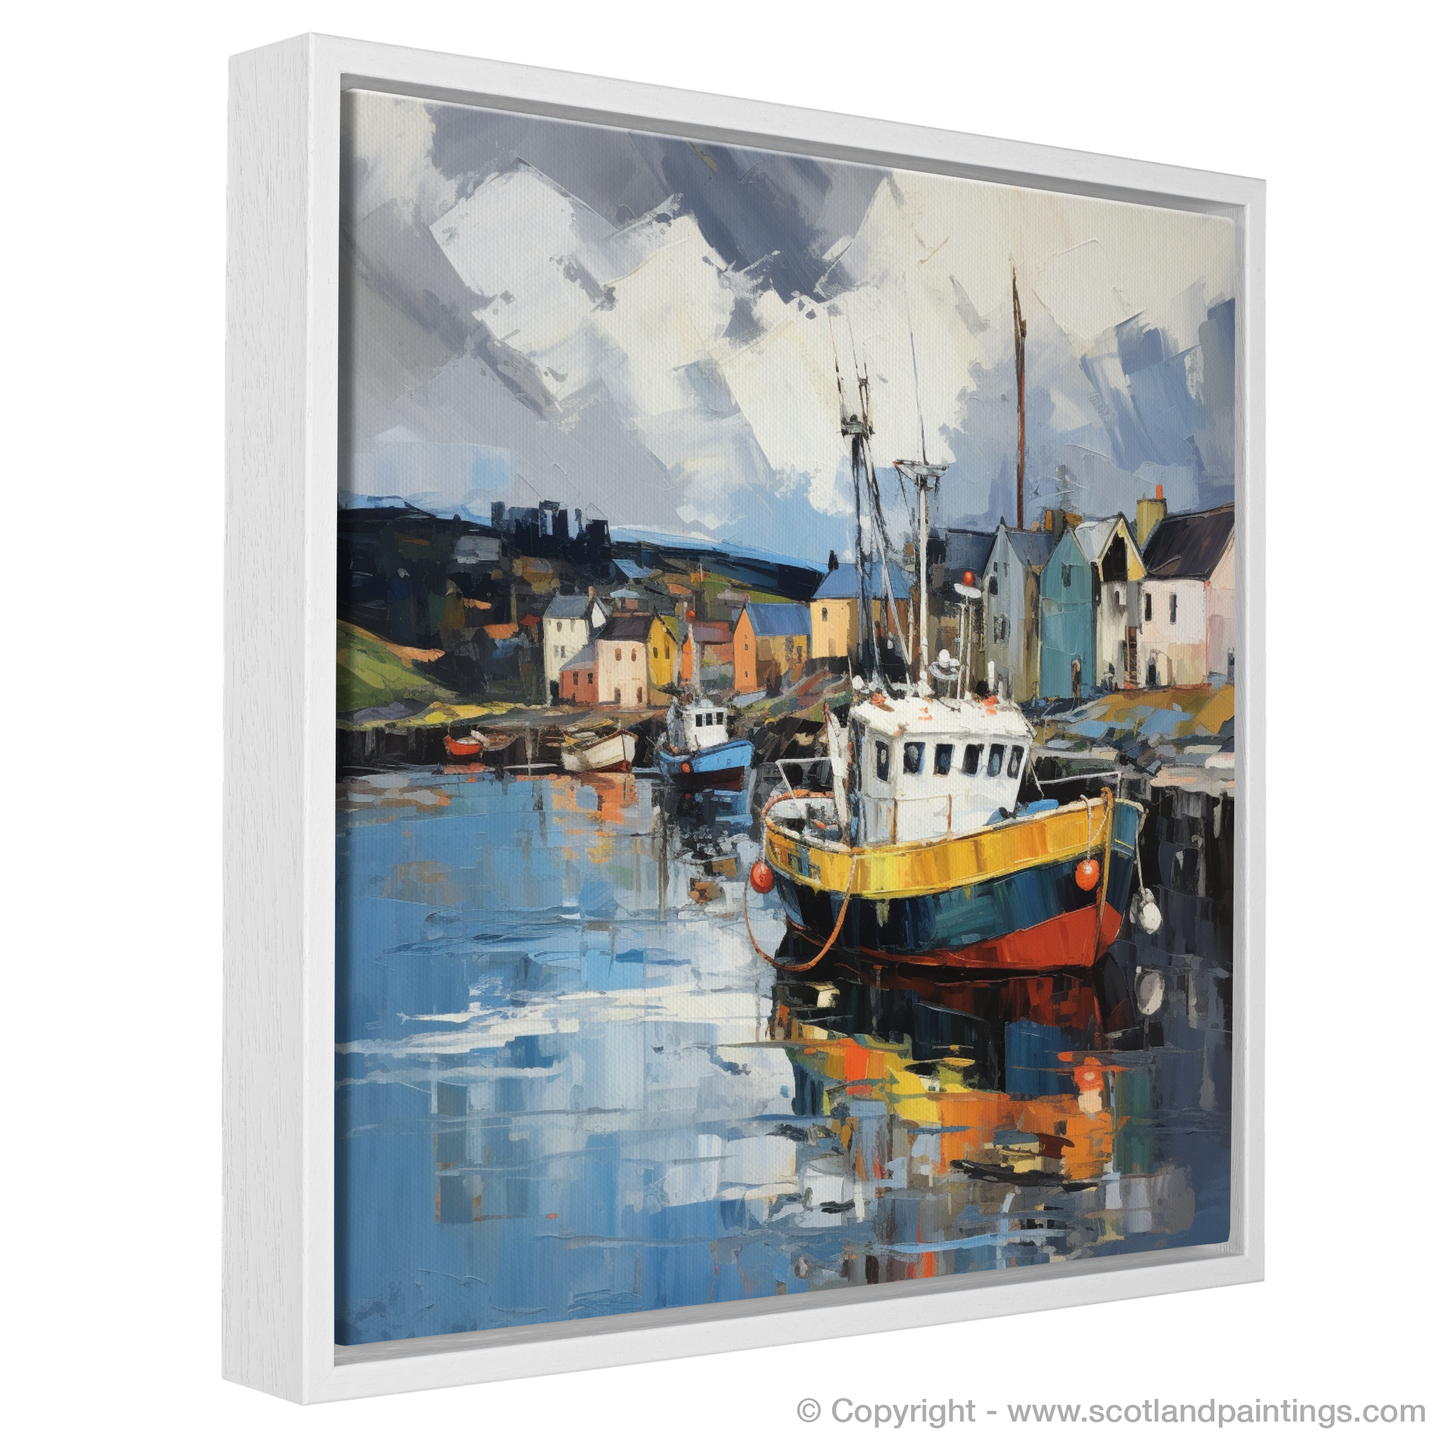 Painting and Art Print of Cromarty Harbour with a stormy sky entitled "Tempest over Cromarty Harbour".